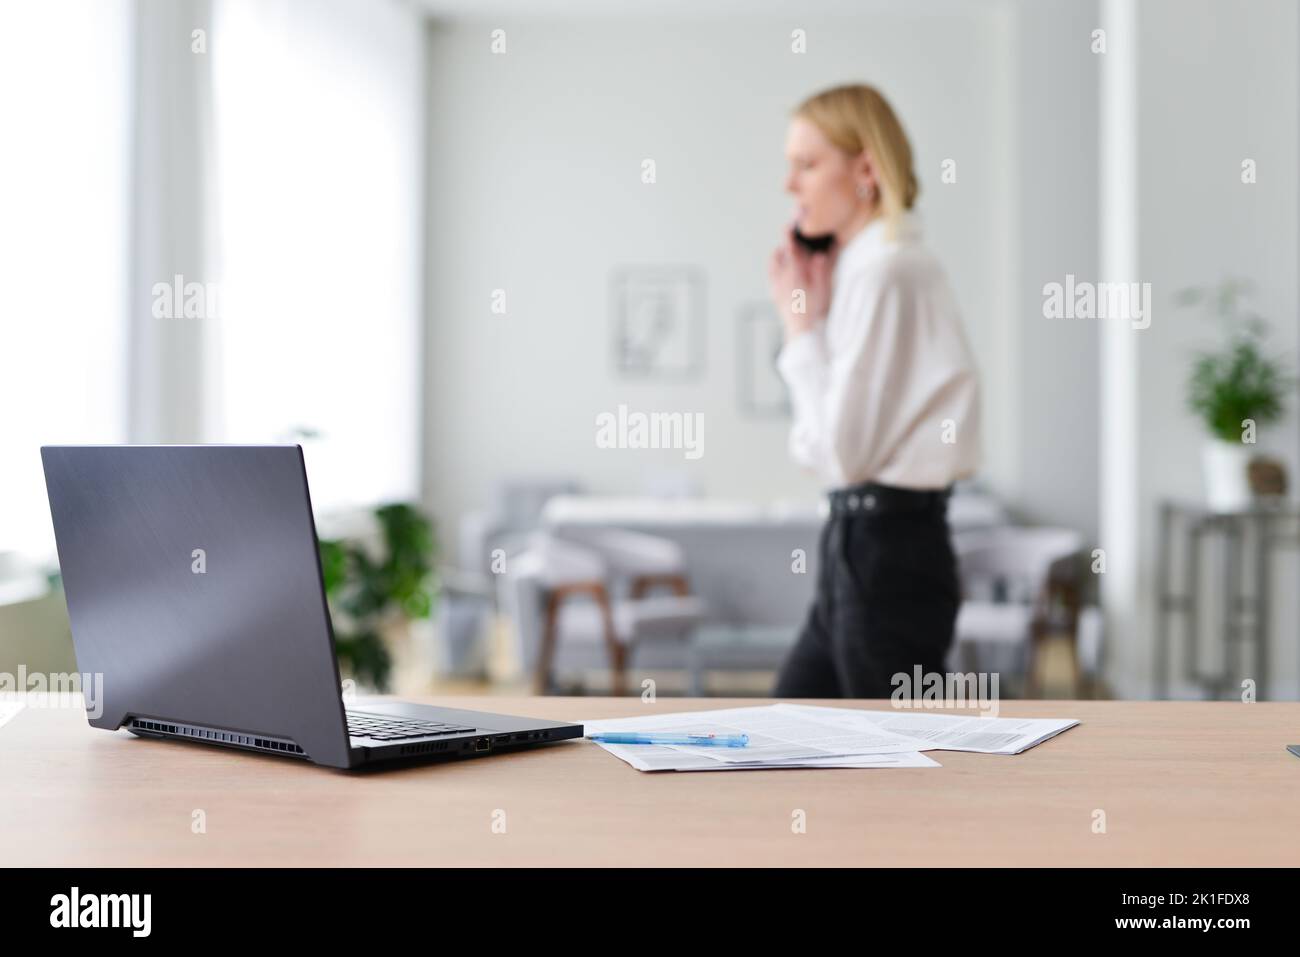 Woman talks on the phone and walks around her workplace. Stock Photo